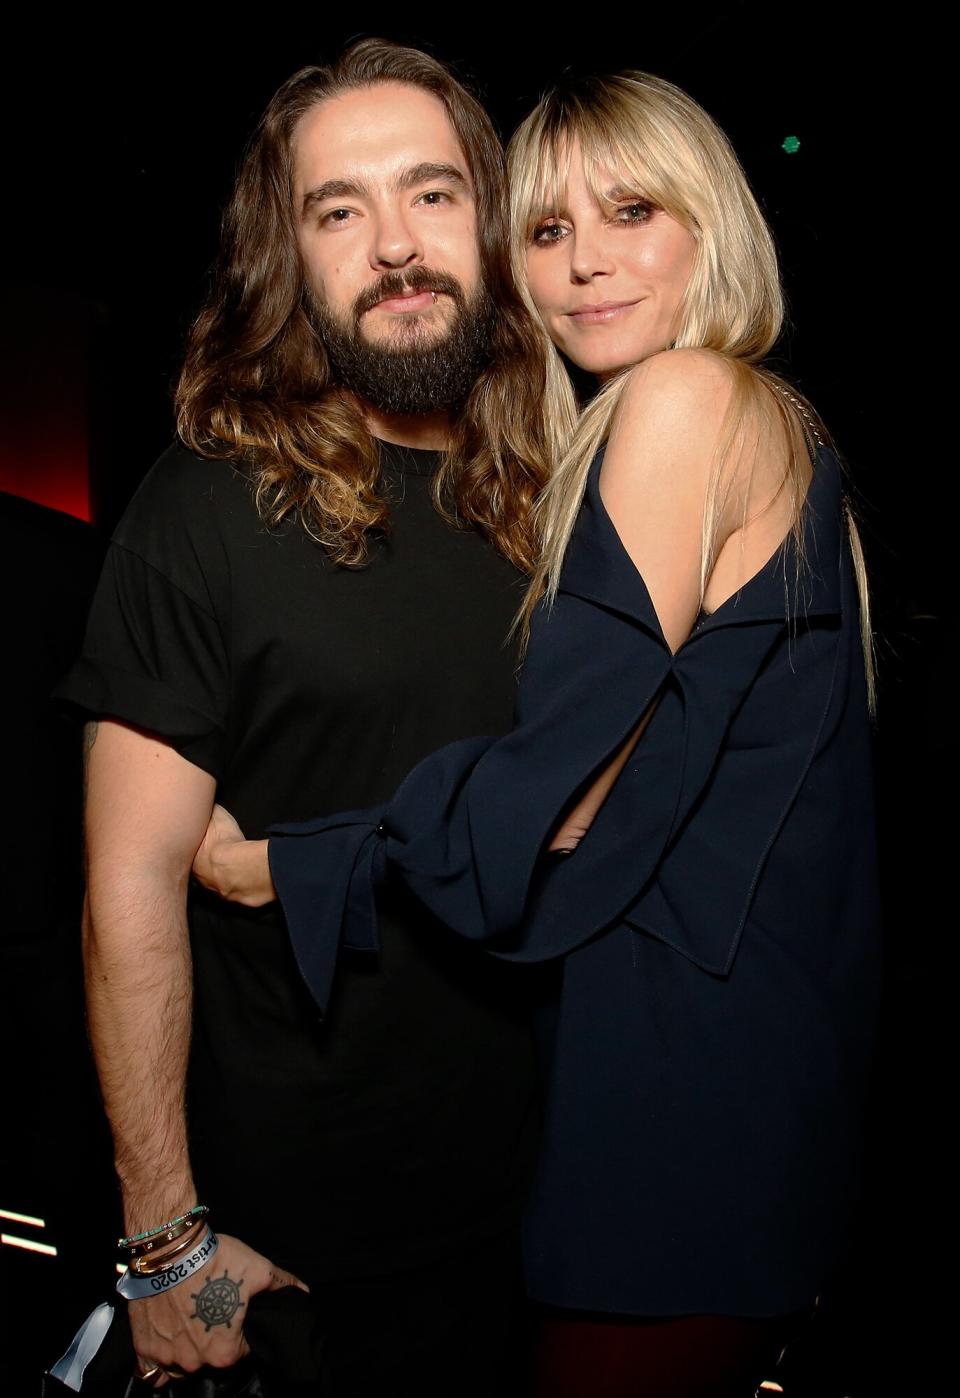 Tom Kaulitz and Heidi Klum attend Spotify Hosts "Best New Artist" Party at The Lot Studios on January 23, 2020 in Los Angeles, California